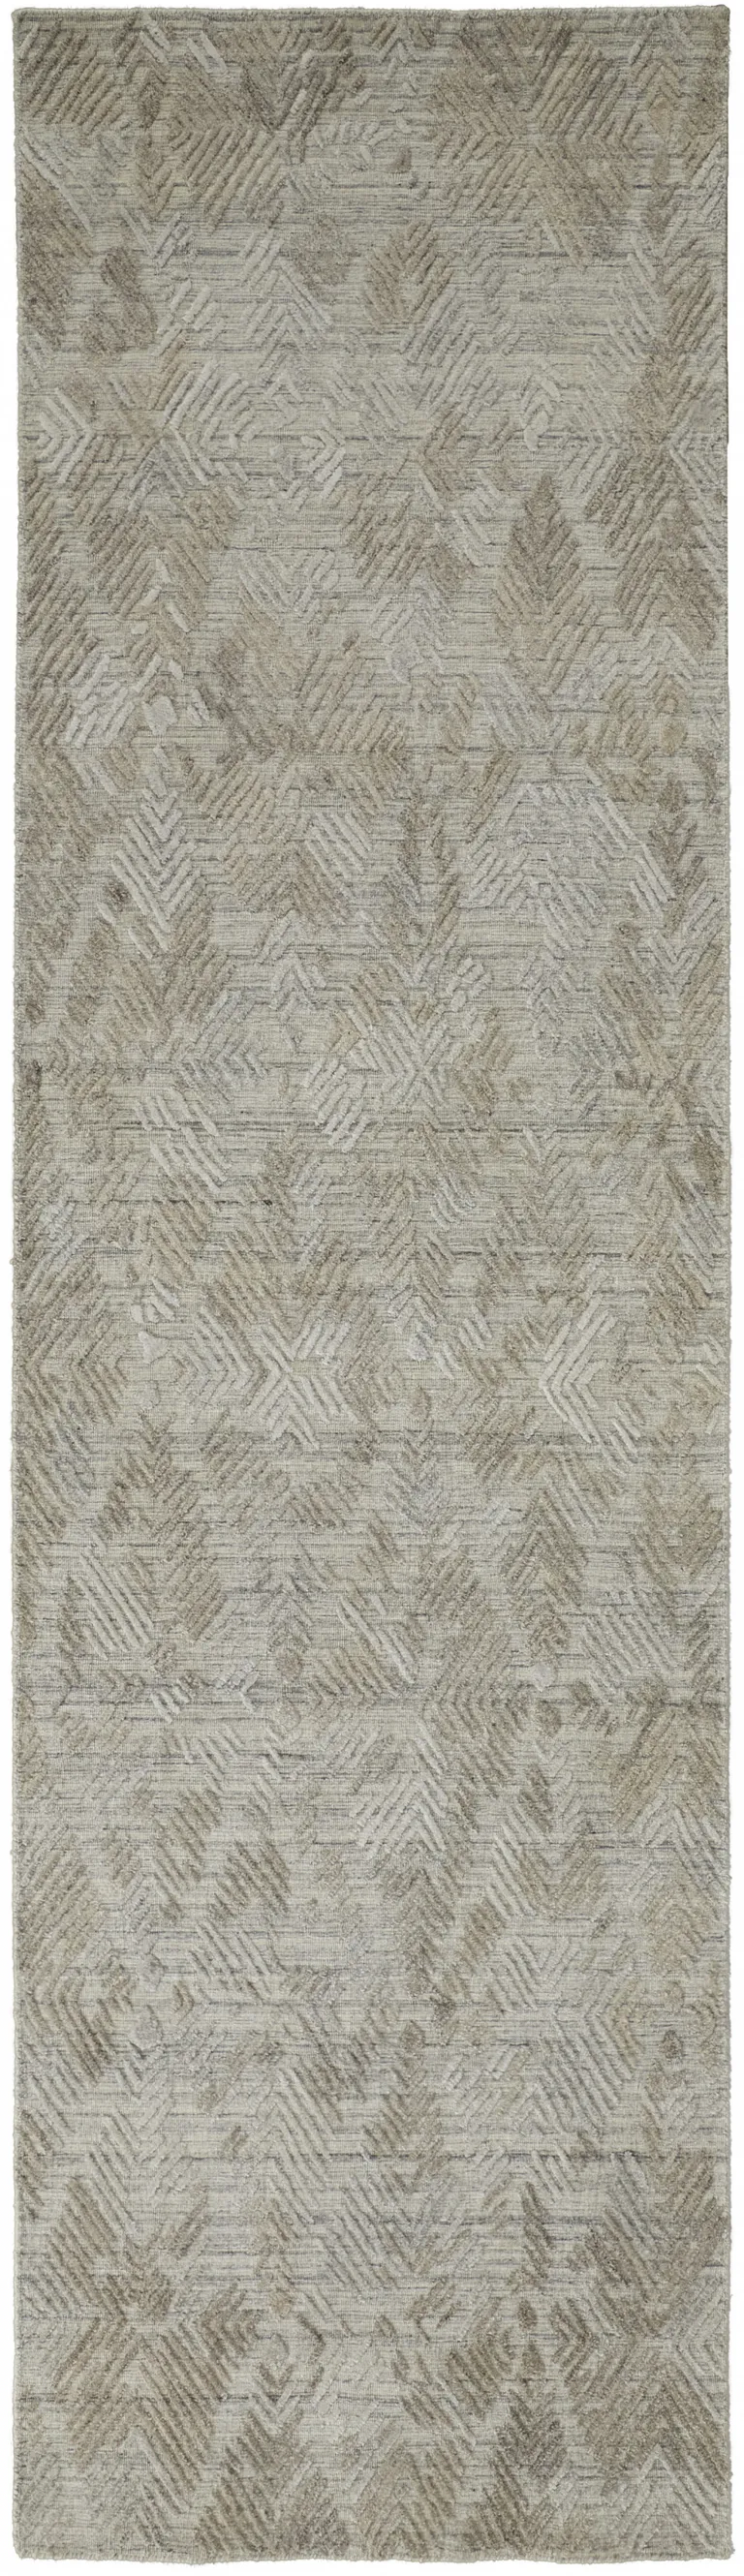 10' Gray And Taupe Abstract Hand Woven Runner Rug Photo 1